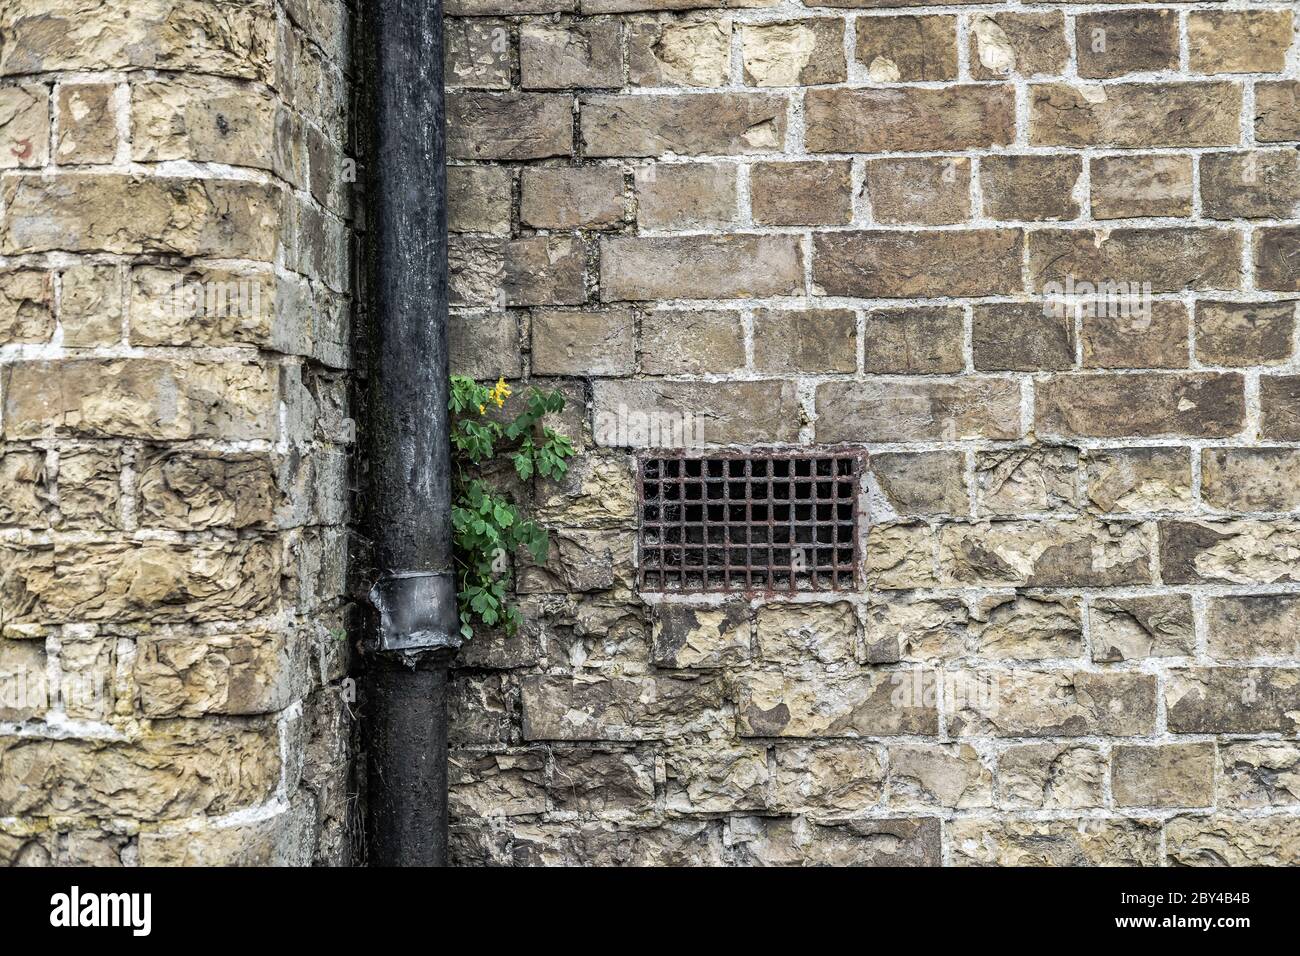 Ventilation Brickwork High Resolution Stock Photography and Images - Alamy